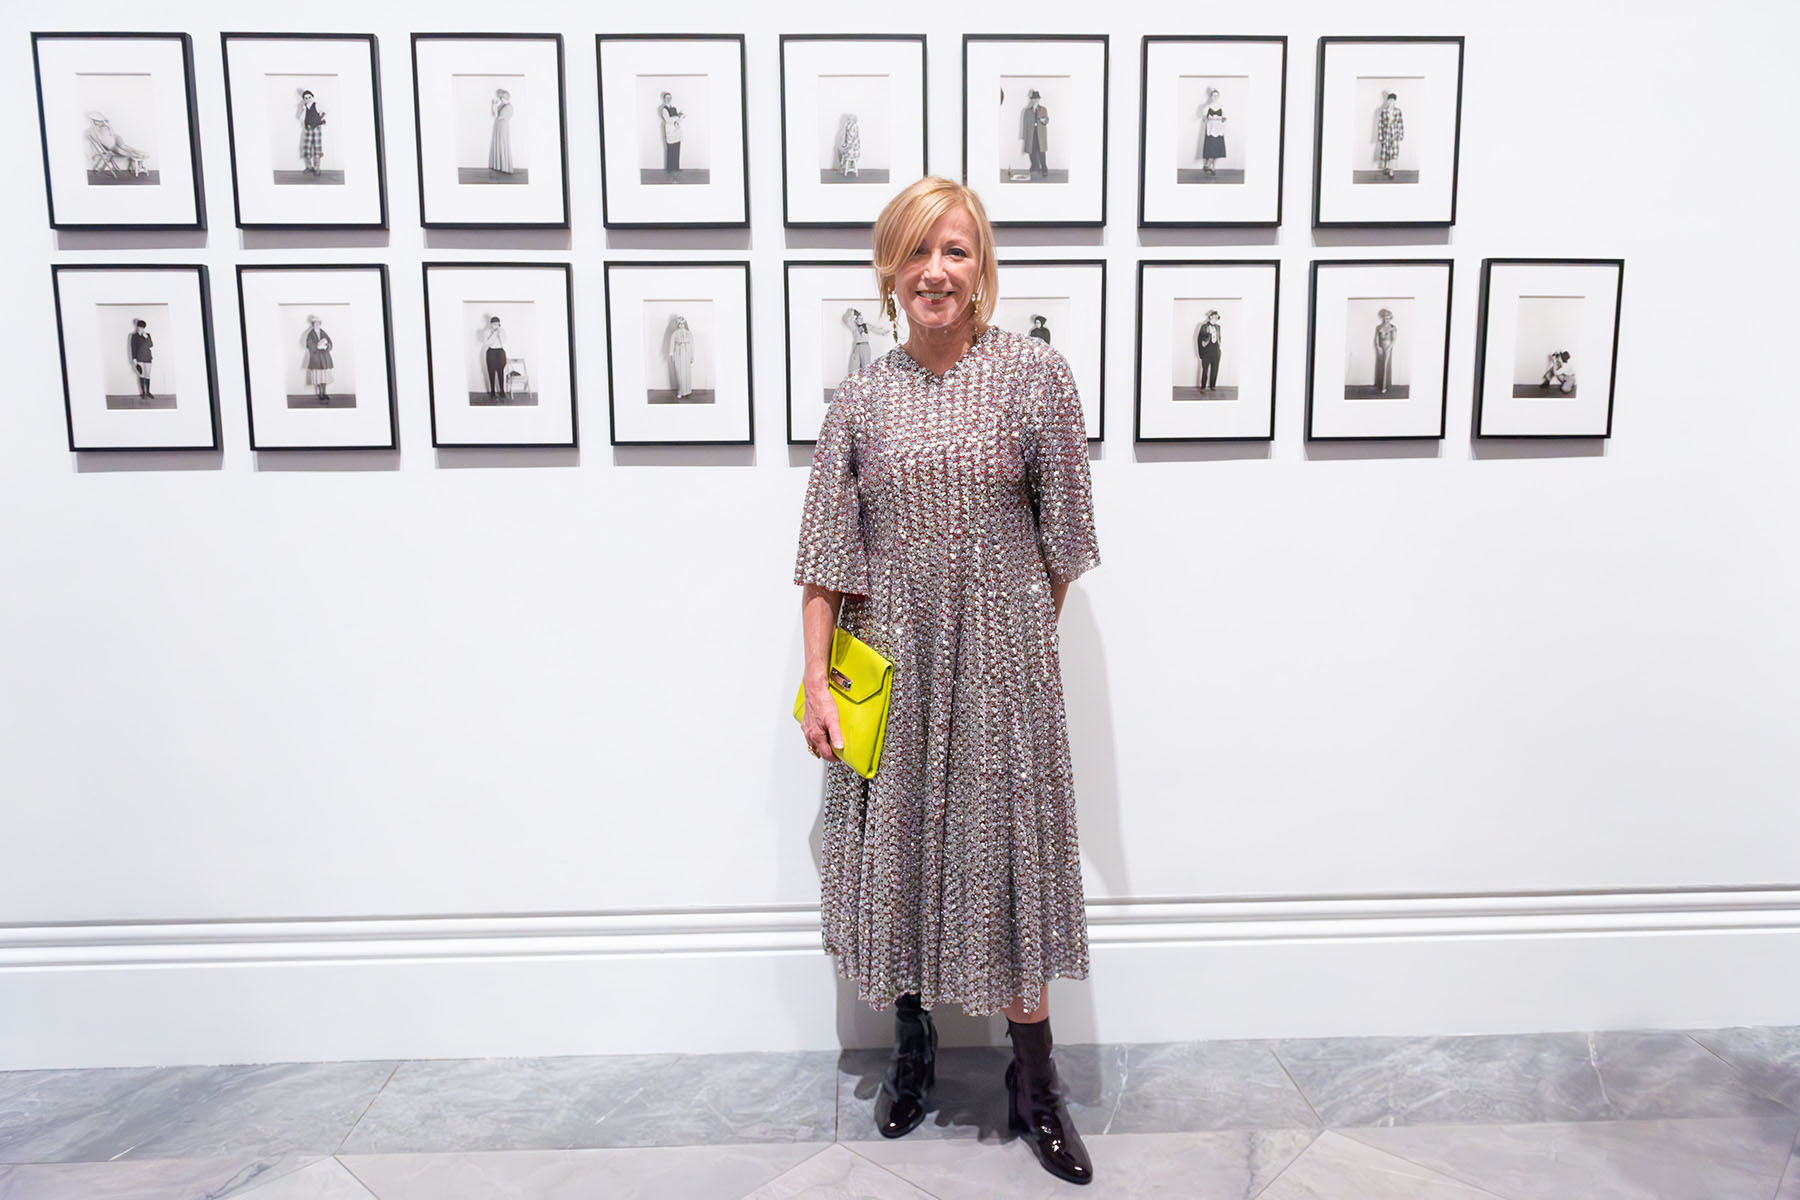 Cindy Sherman - Private view at National Portrait Gallery, London